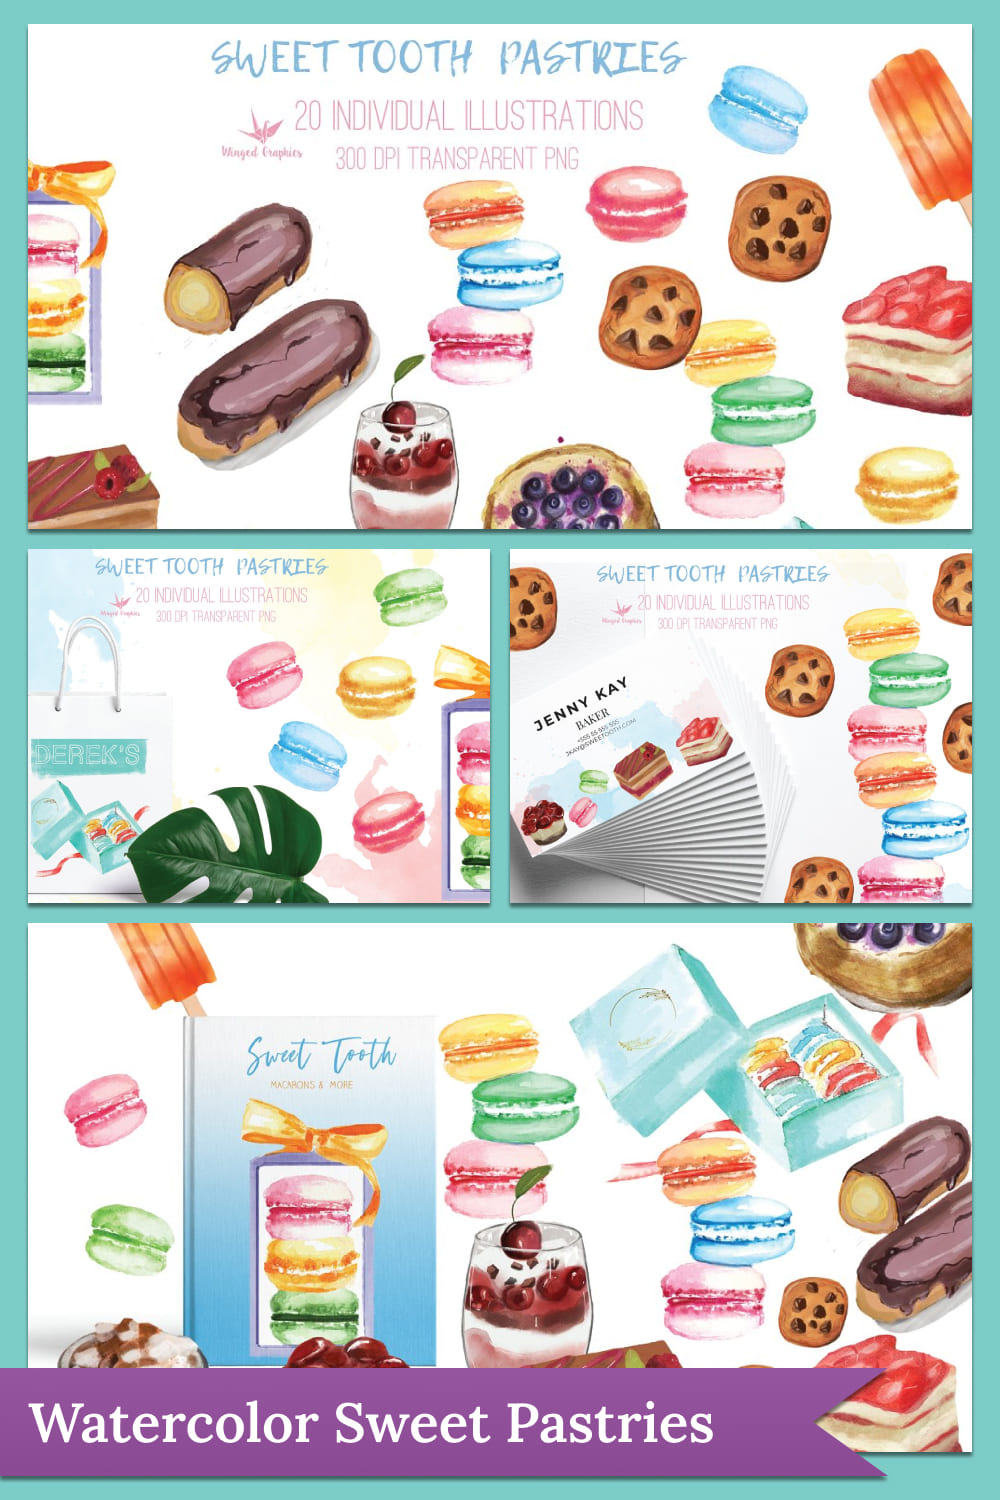 Watercolor sweet pastries desserts - pinterest image preview.